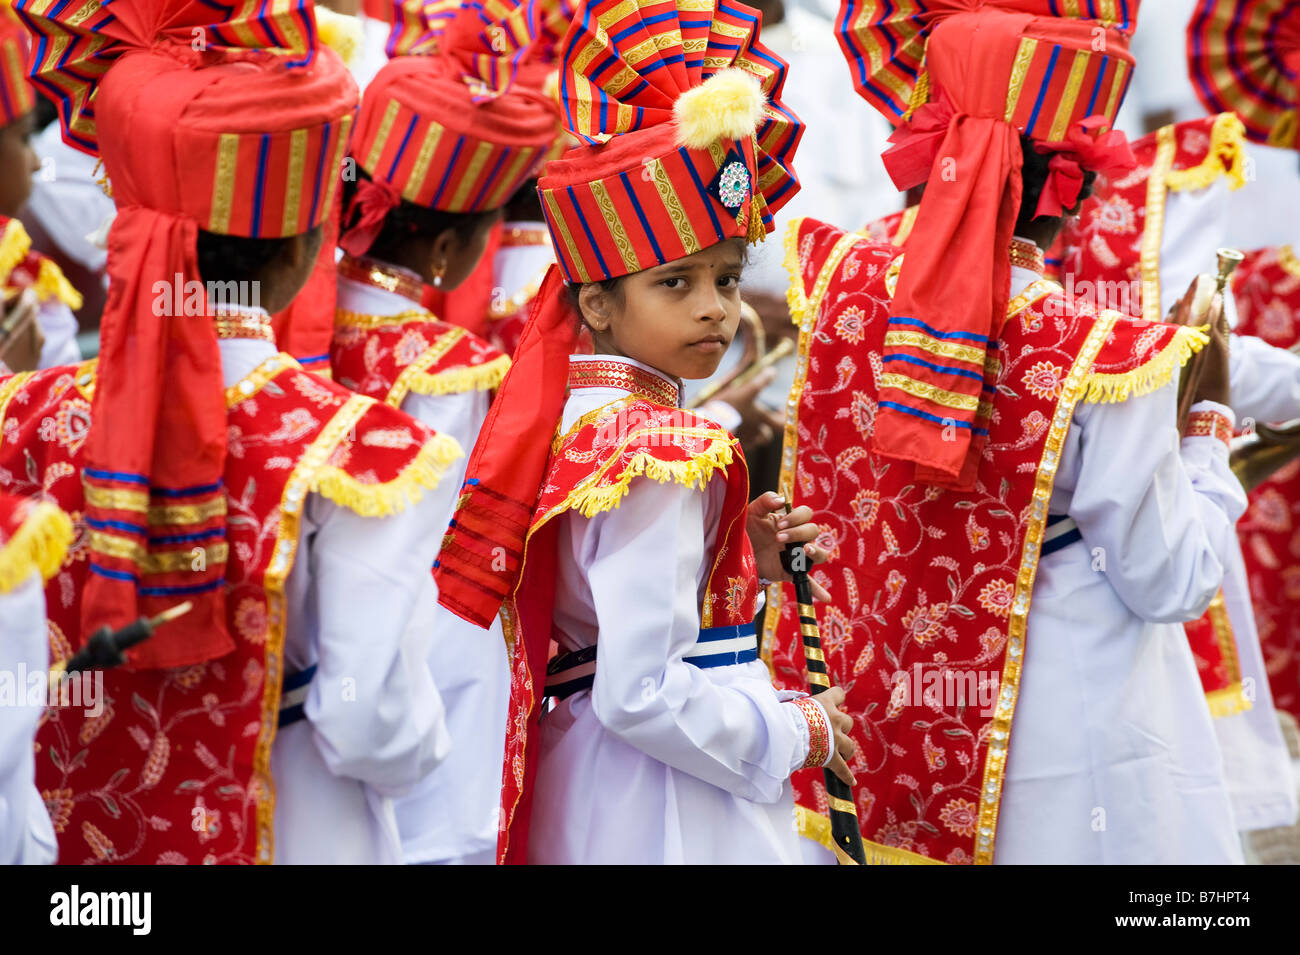 Colourful costumes of Indian Girls in a marching band in a street pageant in the town of Puttaparthi, Andhra Pradesh, India Stock Photo